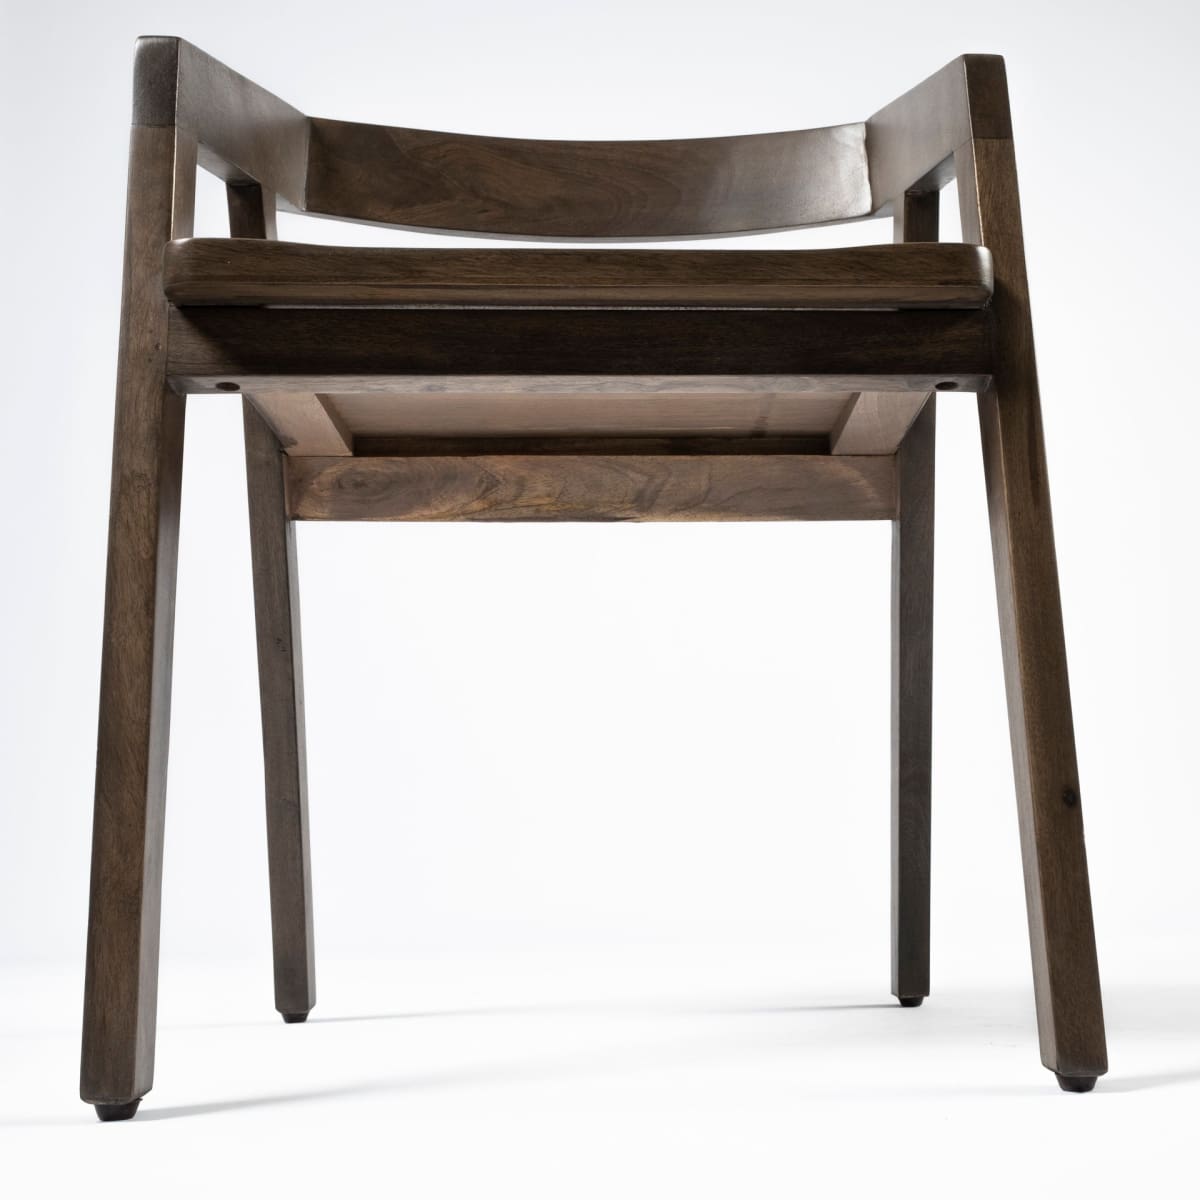 Nicholas Dining Chair Brown Wood - dining-chairs